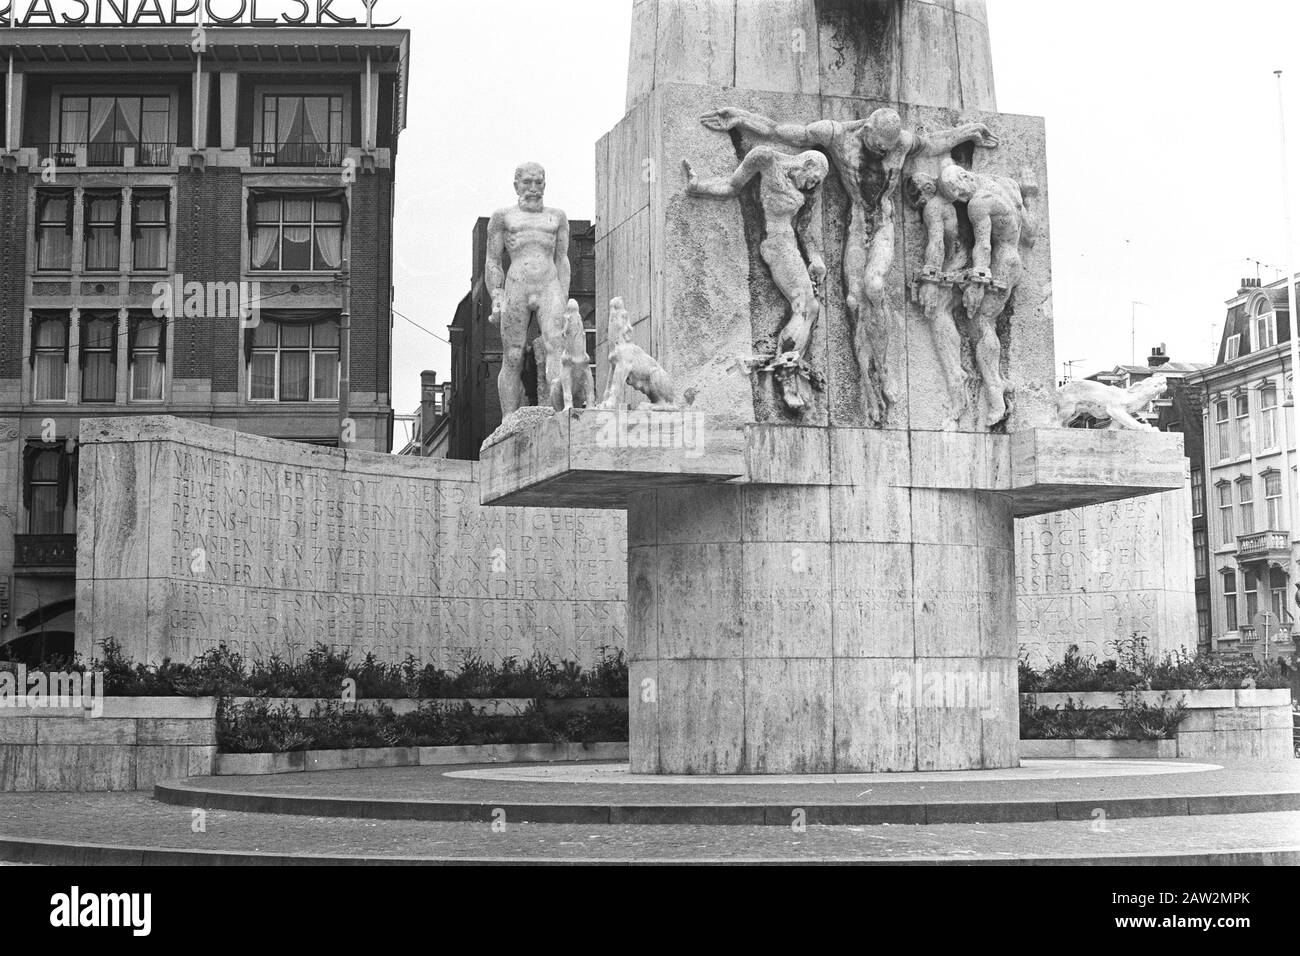 Planters in the National Monument on Dam Square in Amsterdam Date: March 23, 1971 Location: Amsterdam, Noord-Holland Keywords: monuments, plants, squares Institution Name: National Monument Stock Photo